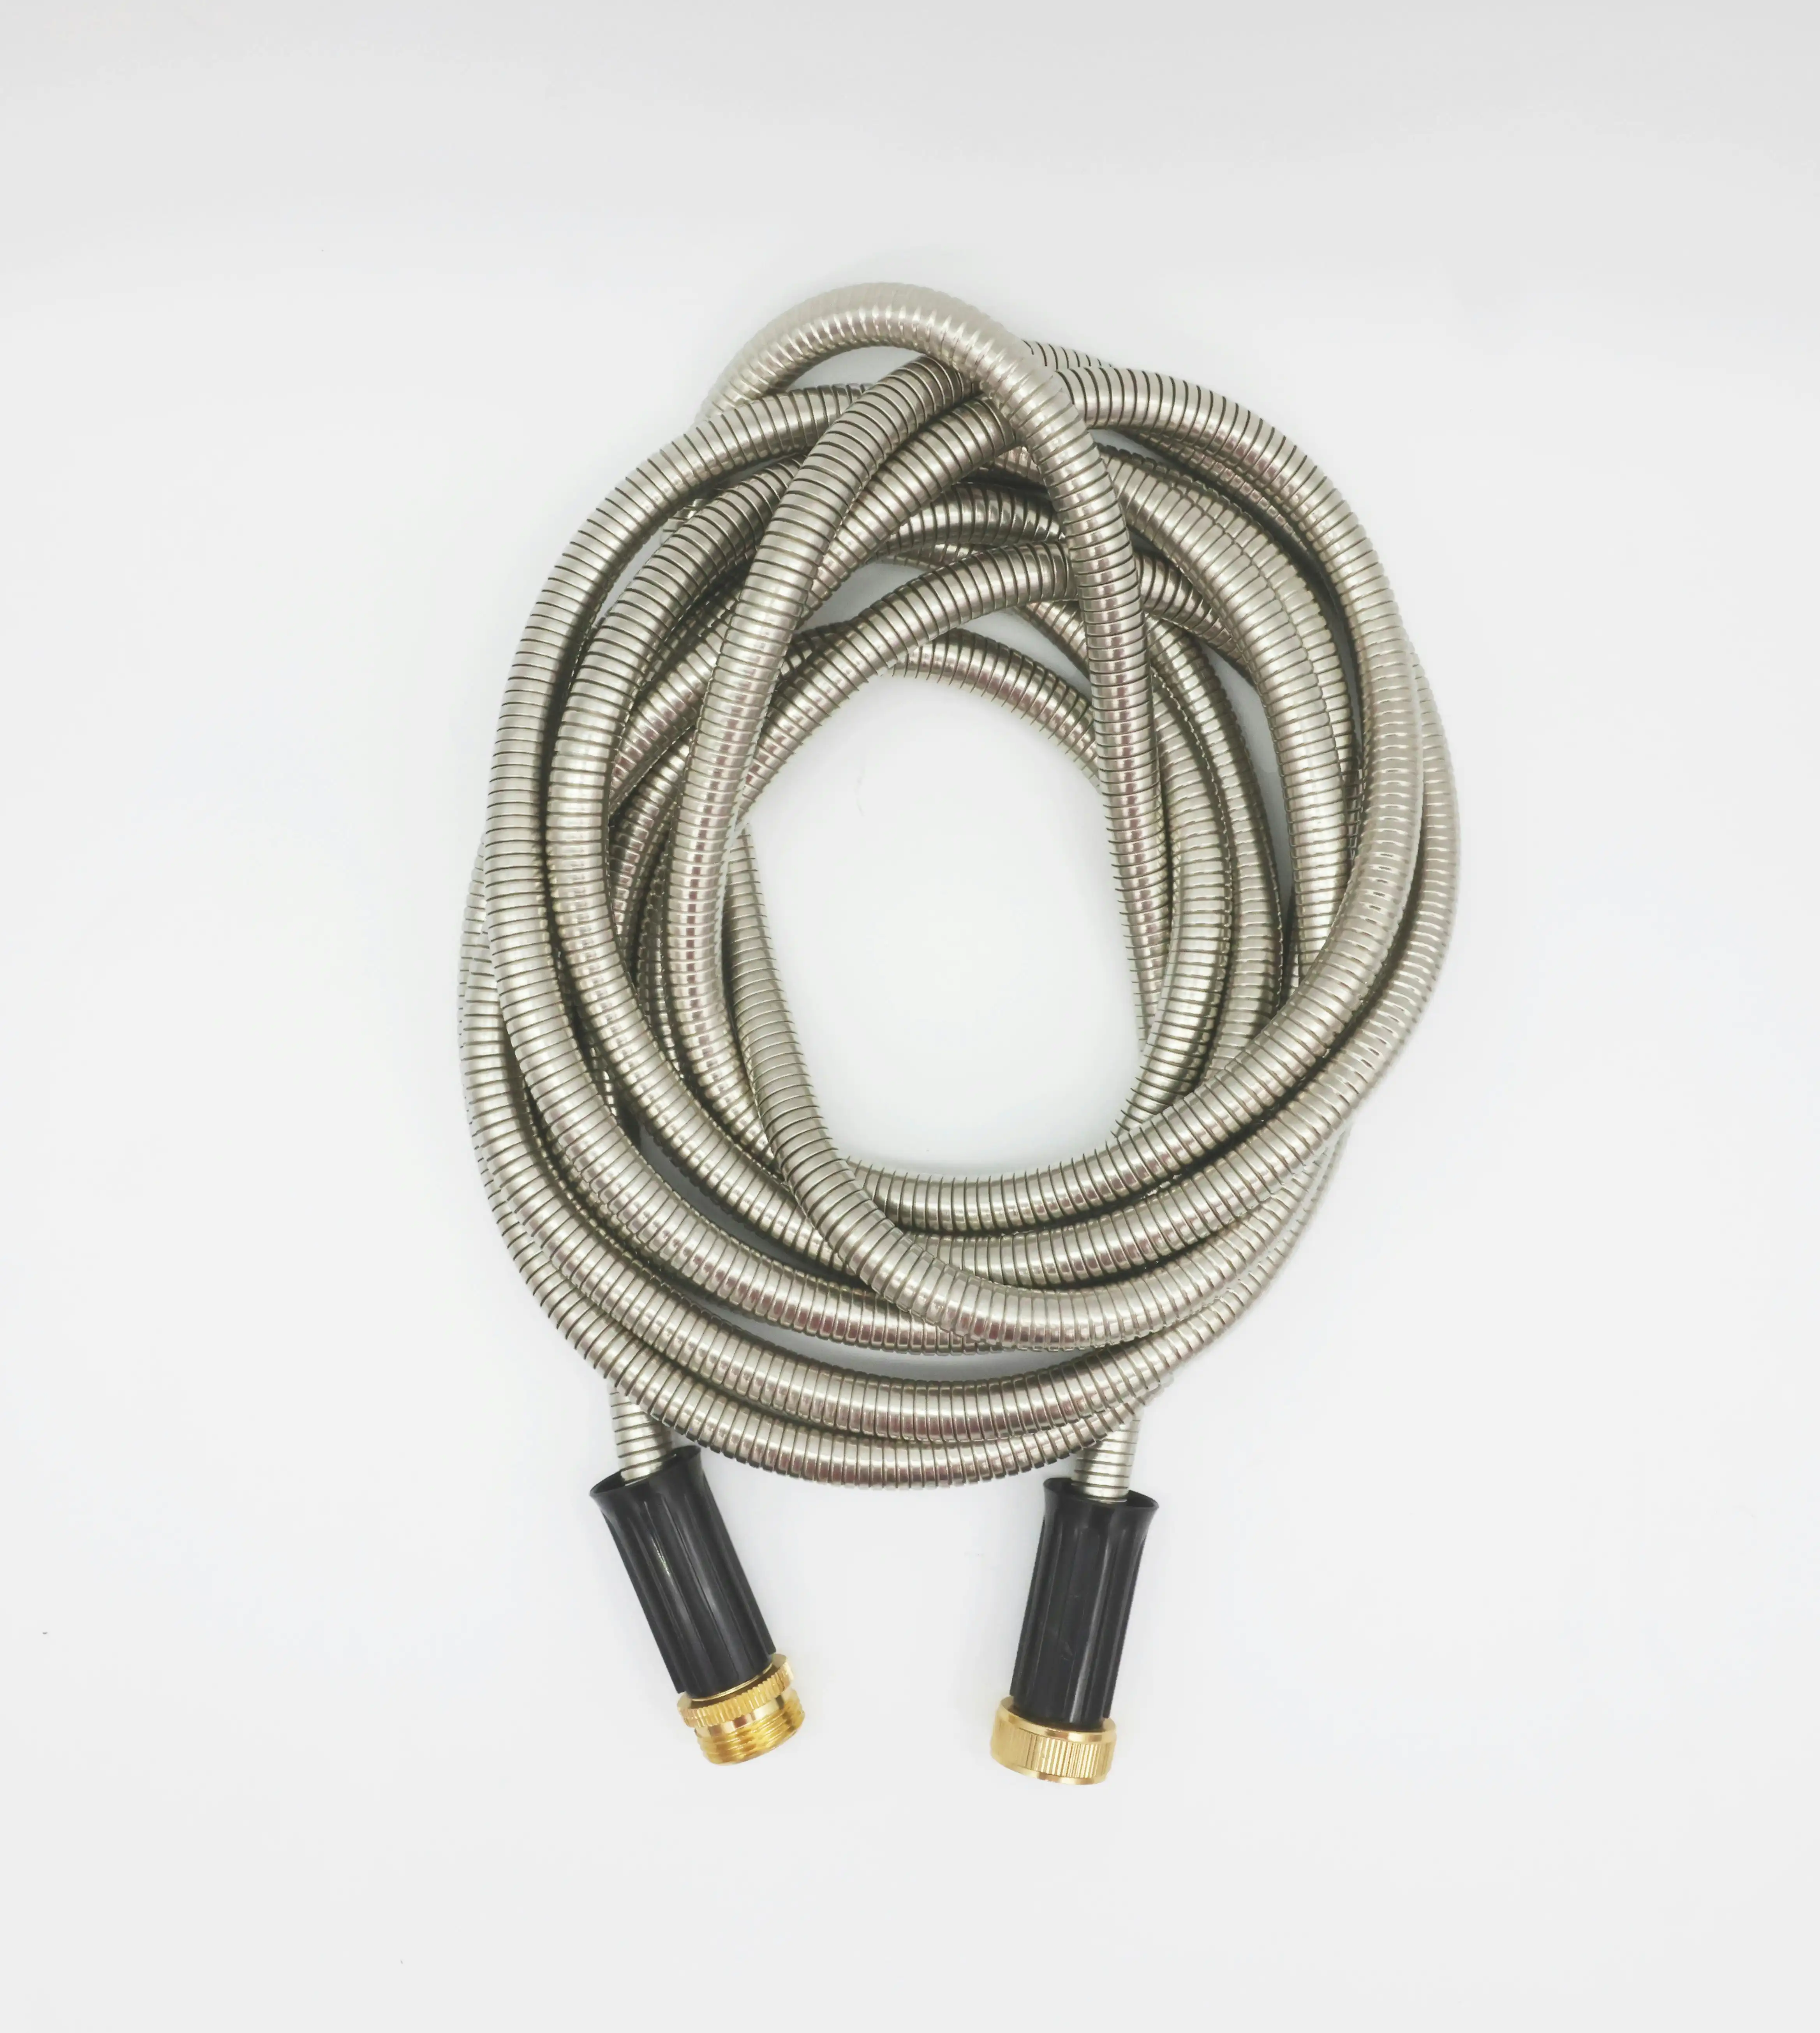 Hercules Expandable Metallic Power Hose - expands up to 7.5m (25 feet)